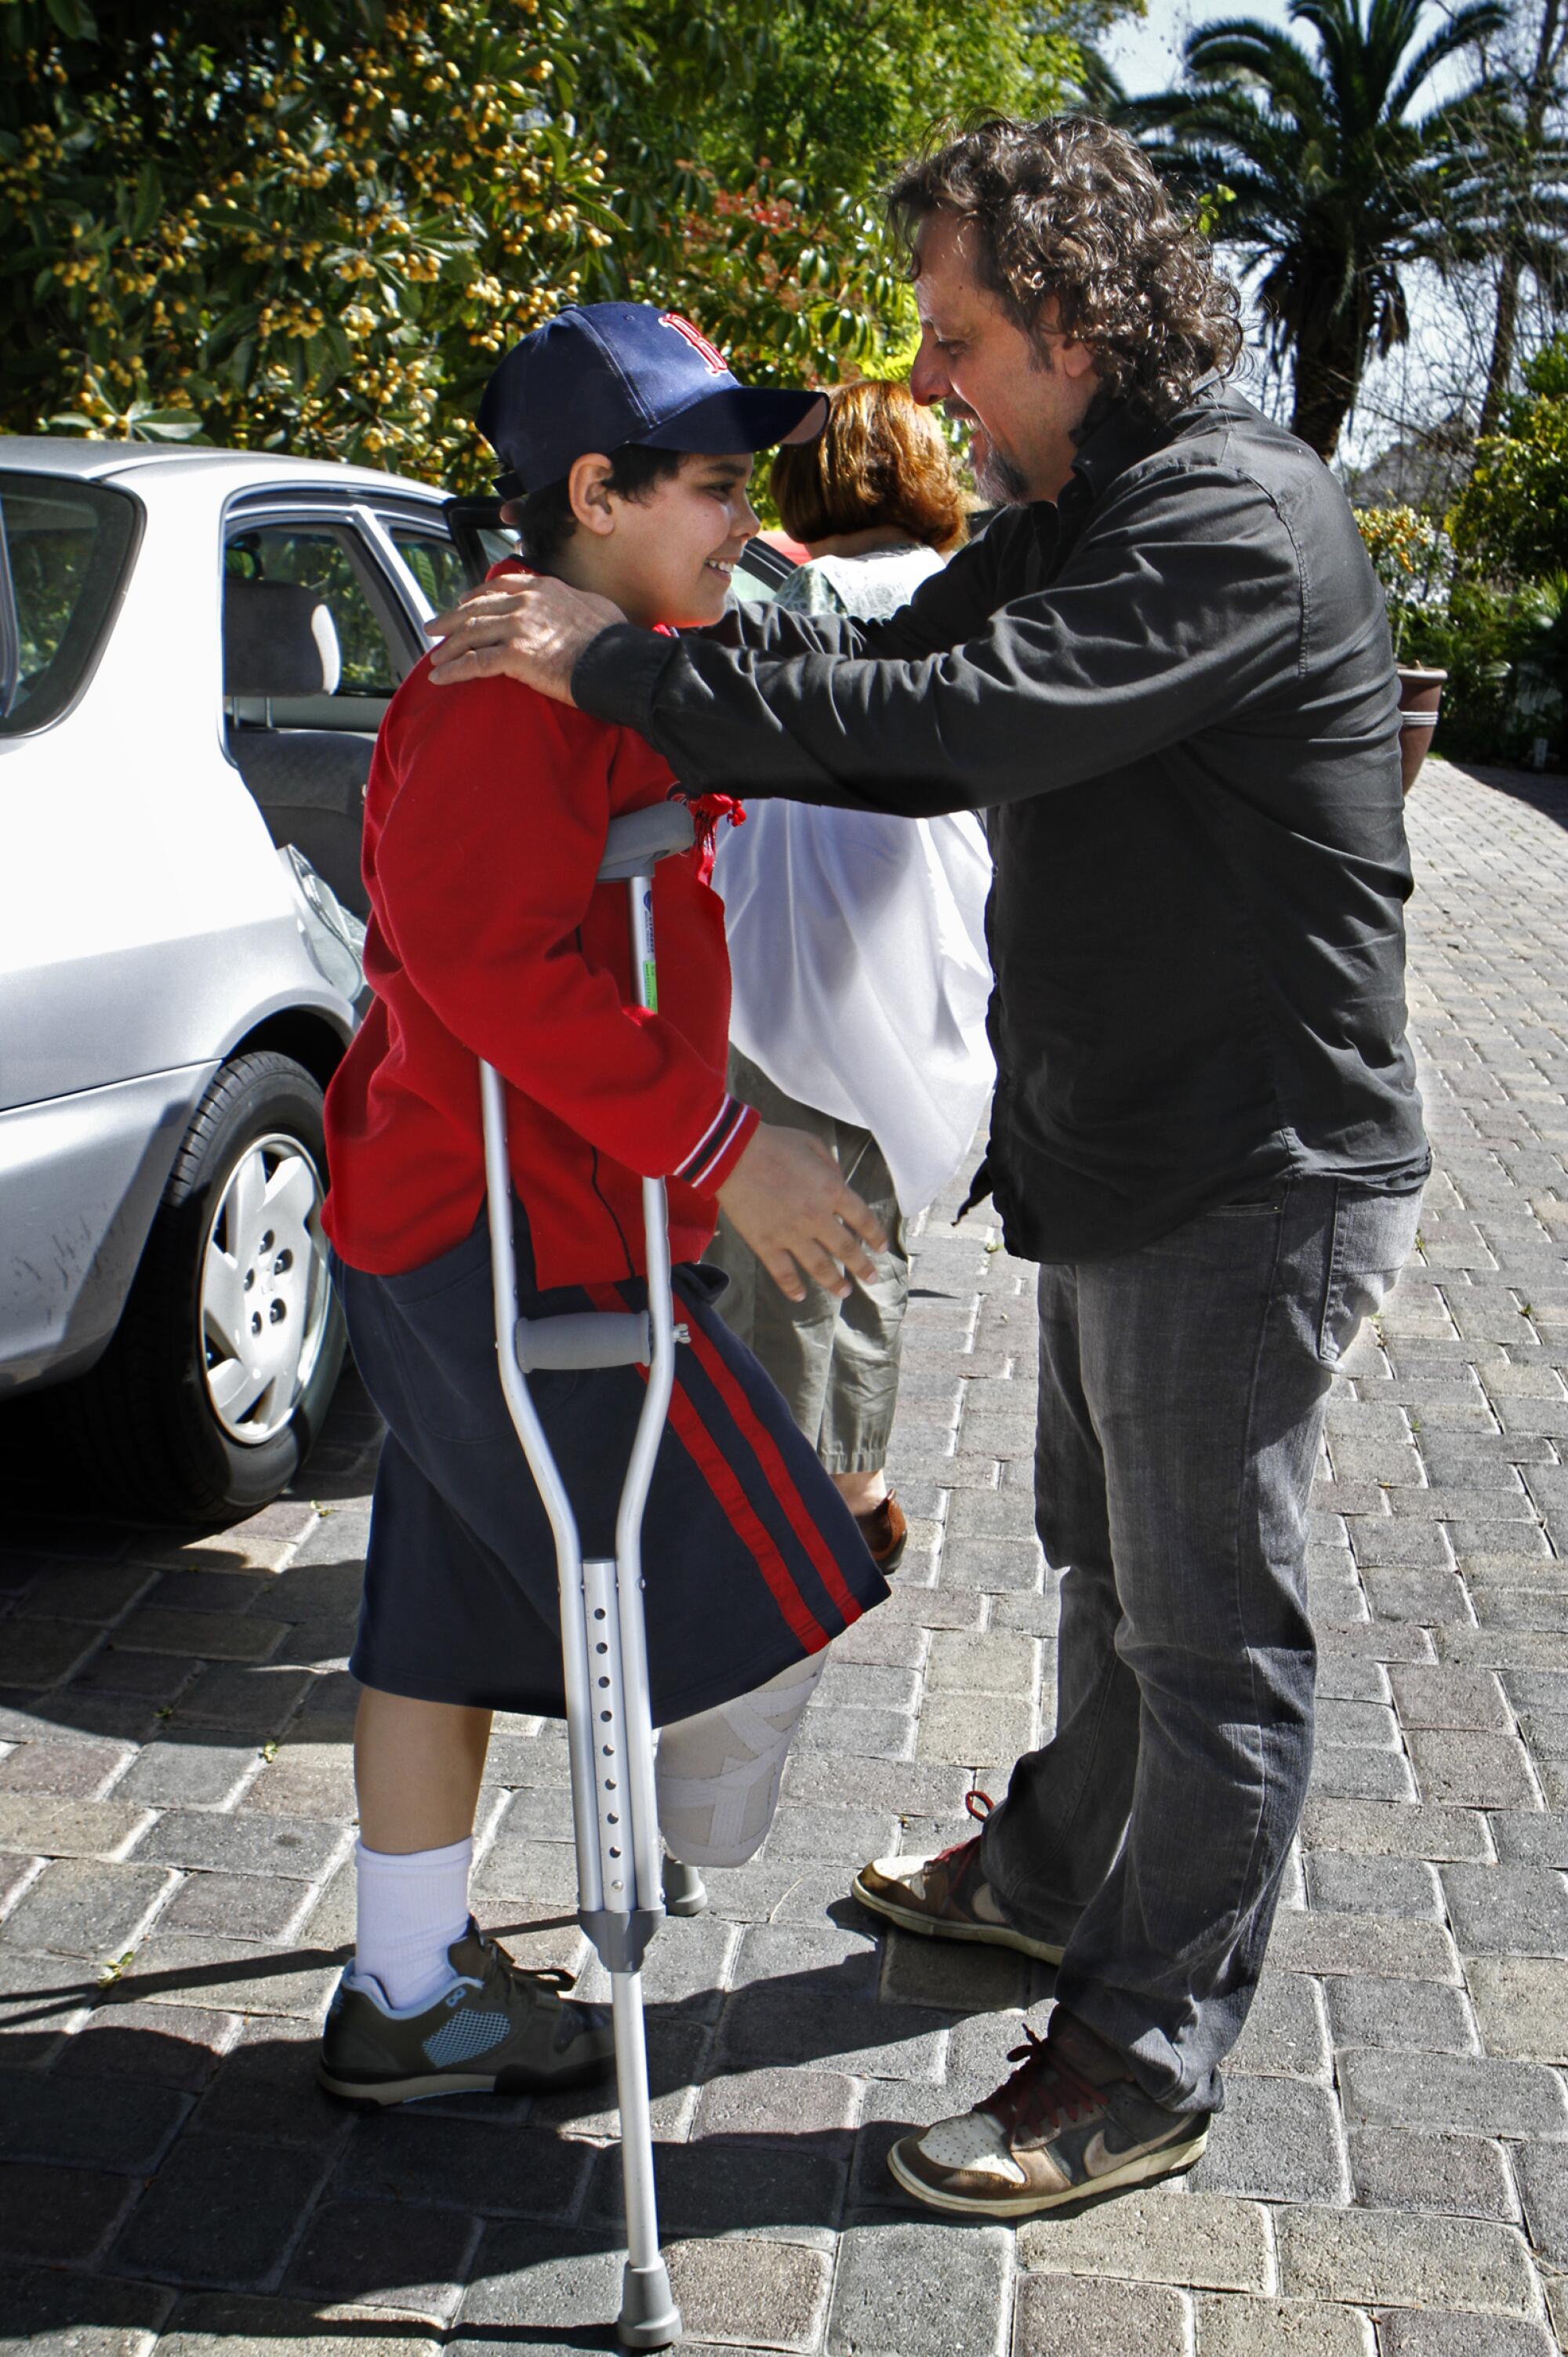 Host parent George Abuhamad welcomes 11-yr-old Abdullah Alathamna to his home in Yorba Linda in 2010 